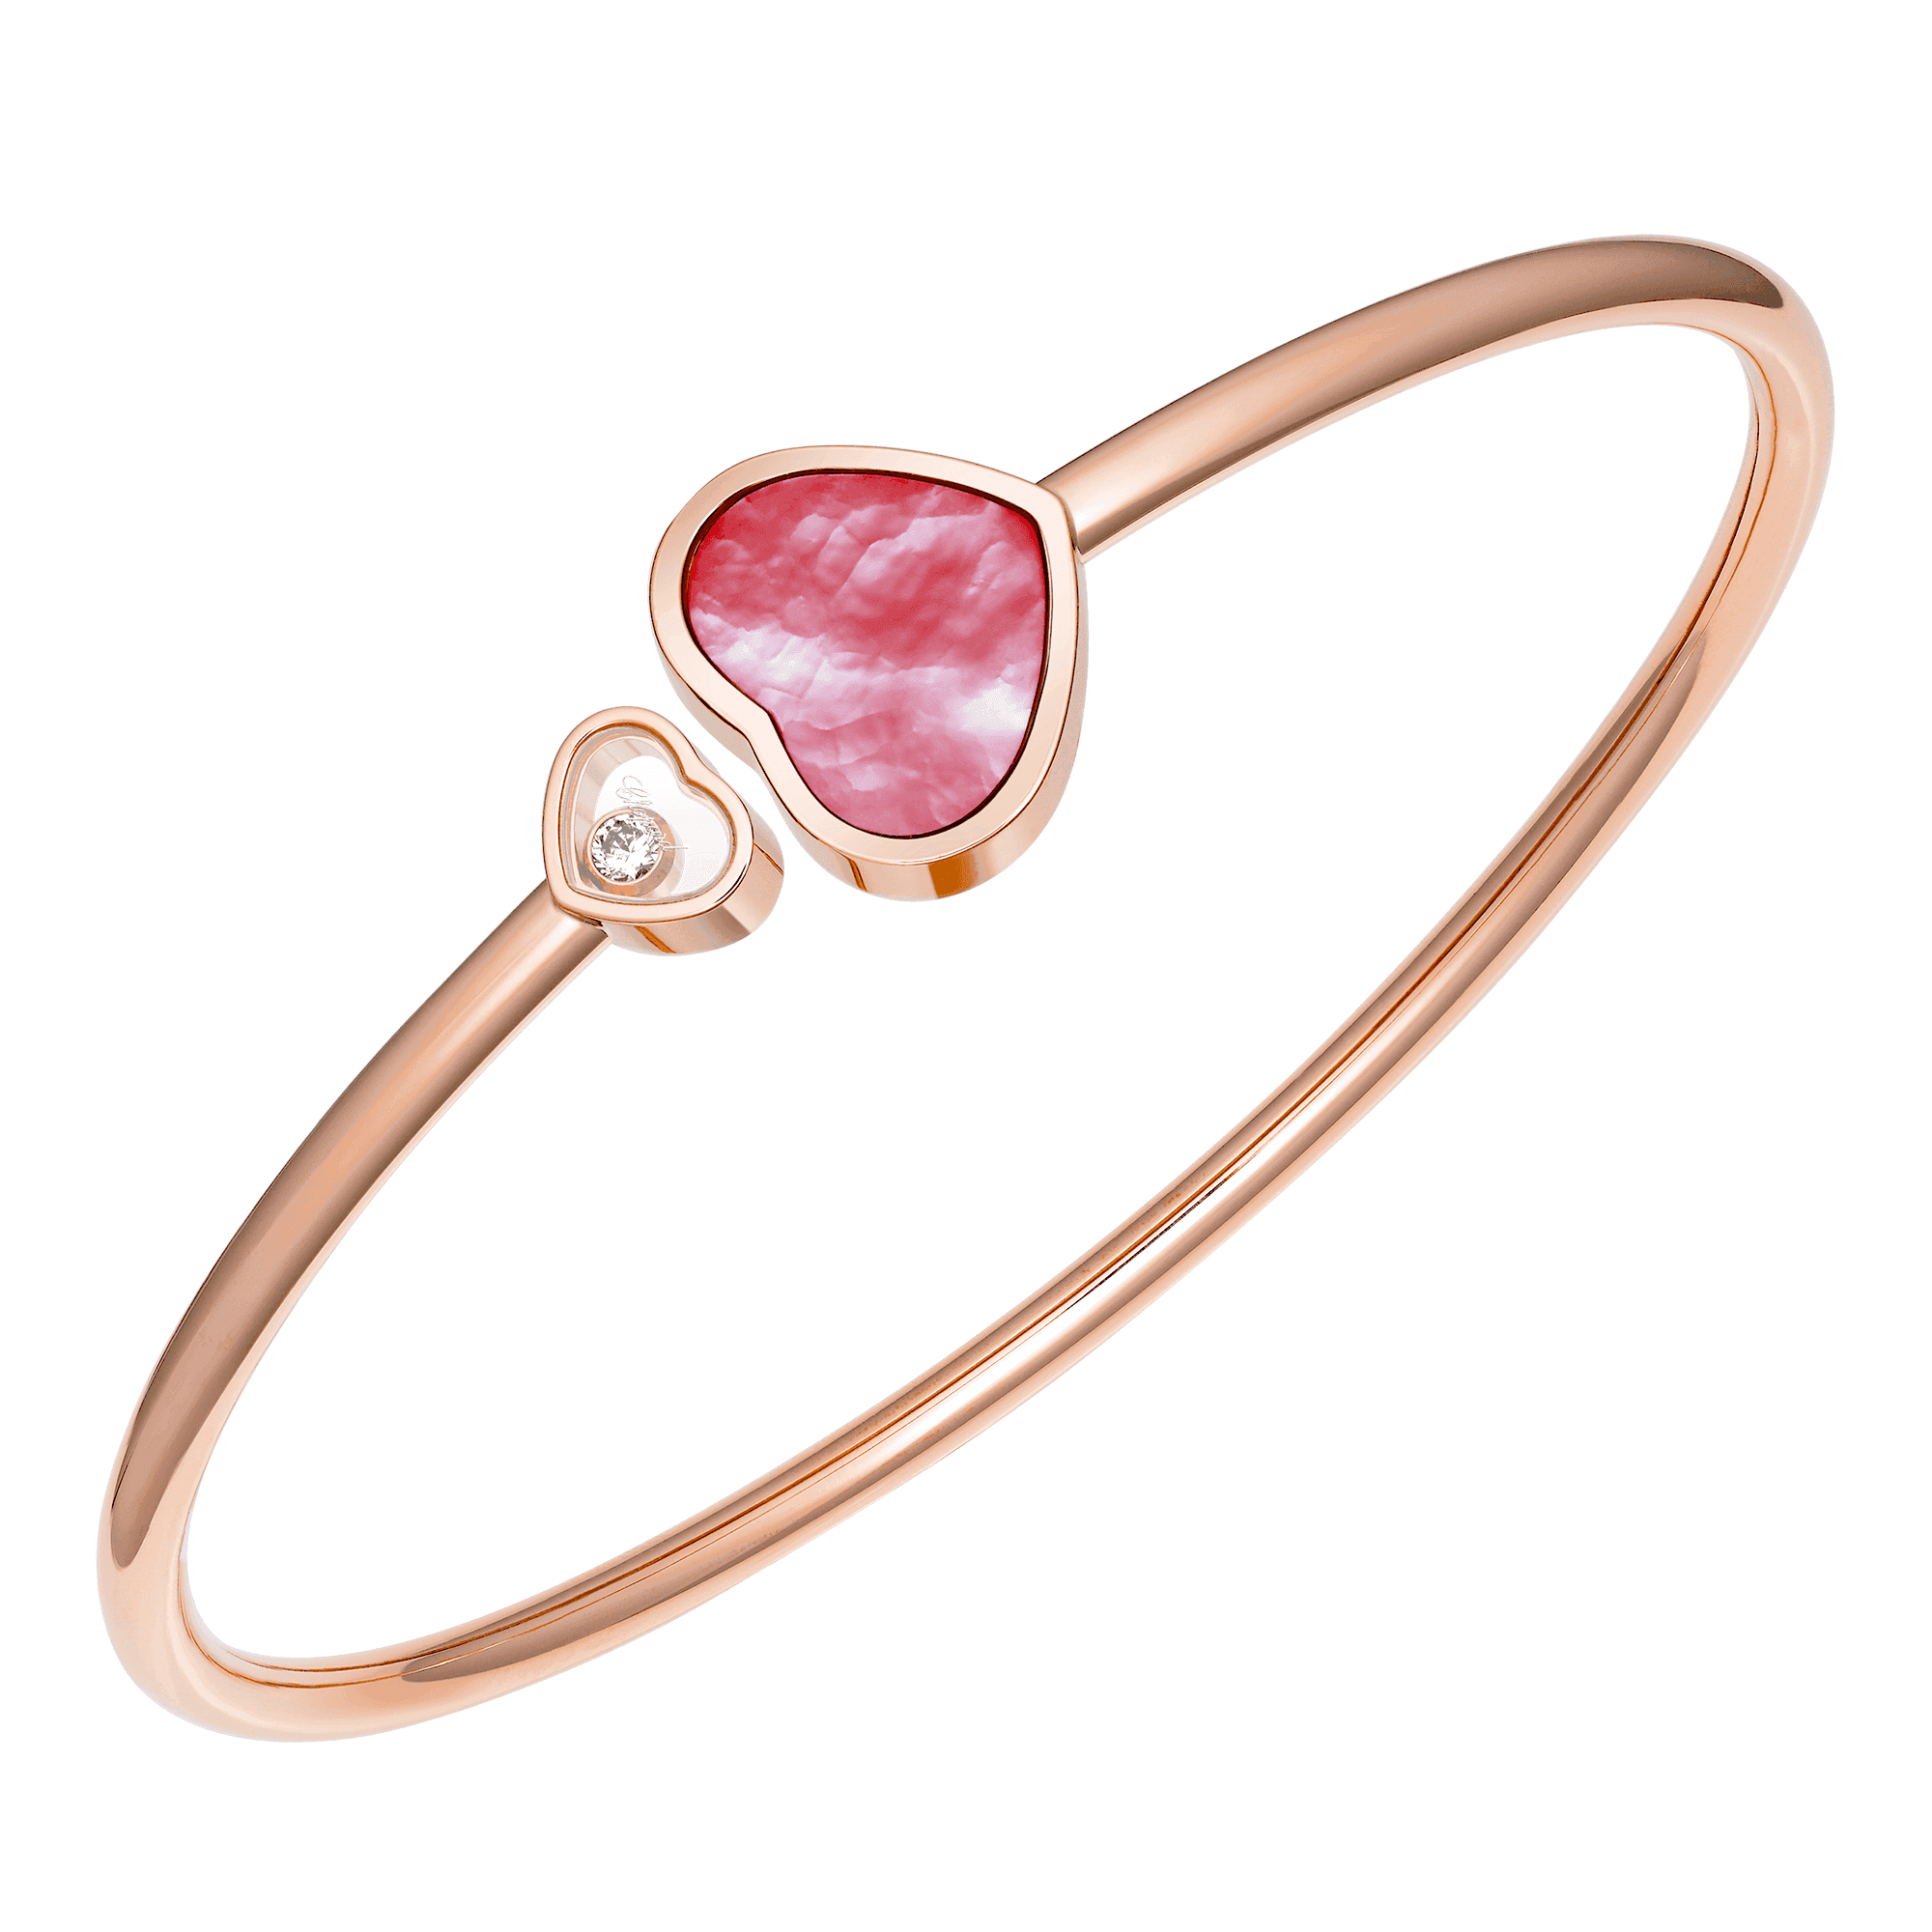 18ct Rose Gold Happy Hearts Natalia Vodianova's "Naked Heart Foundation" Pink Mother Of Pearl & Diamond Bangle